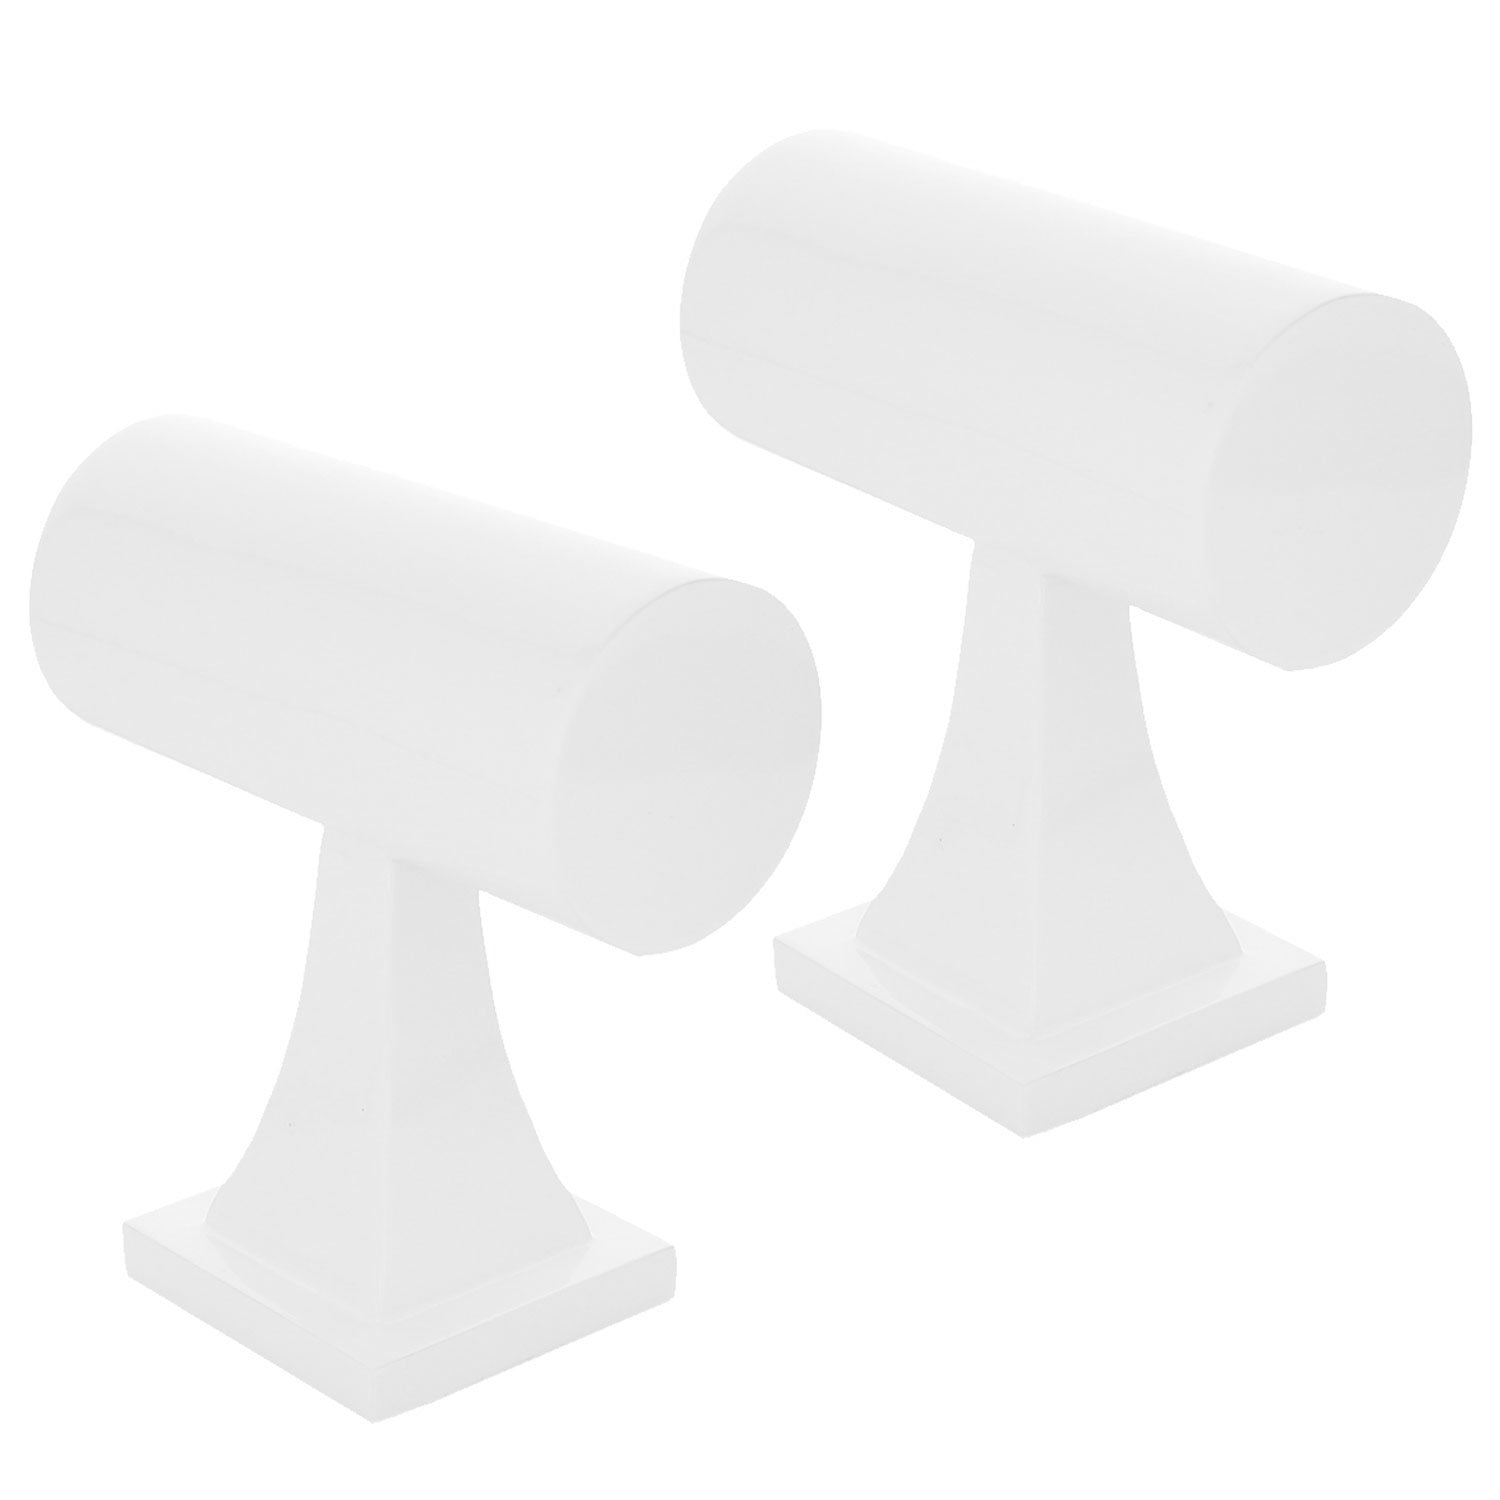 T-bar Display White Laquer- Set of 2